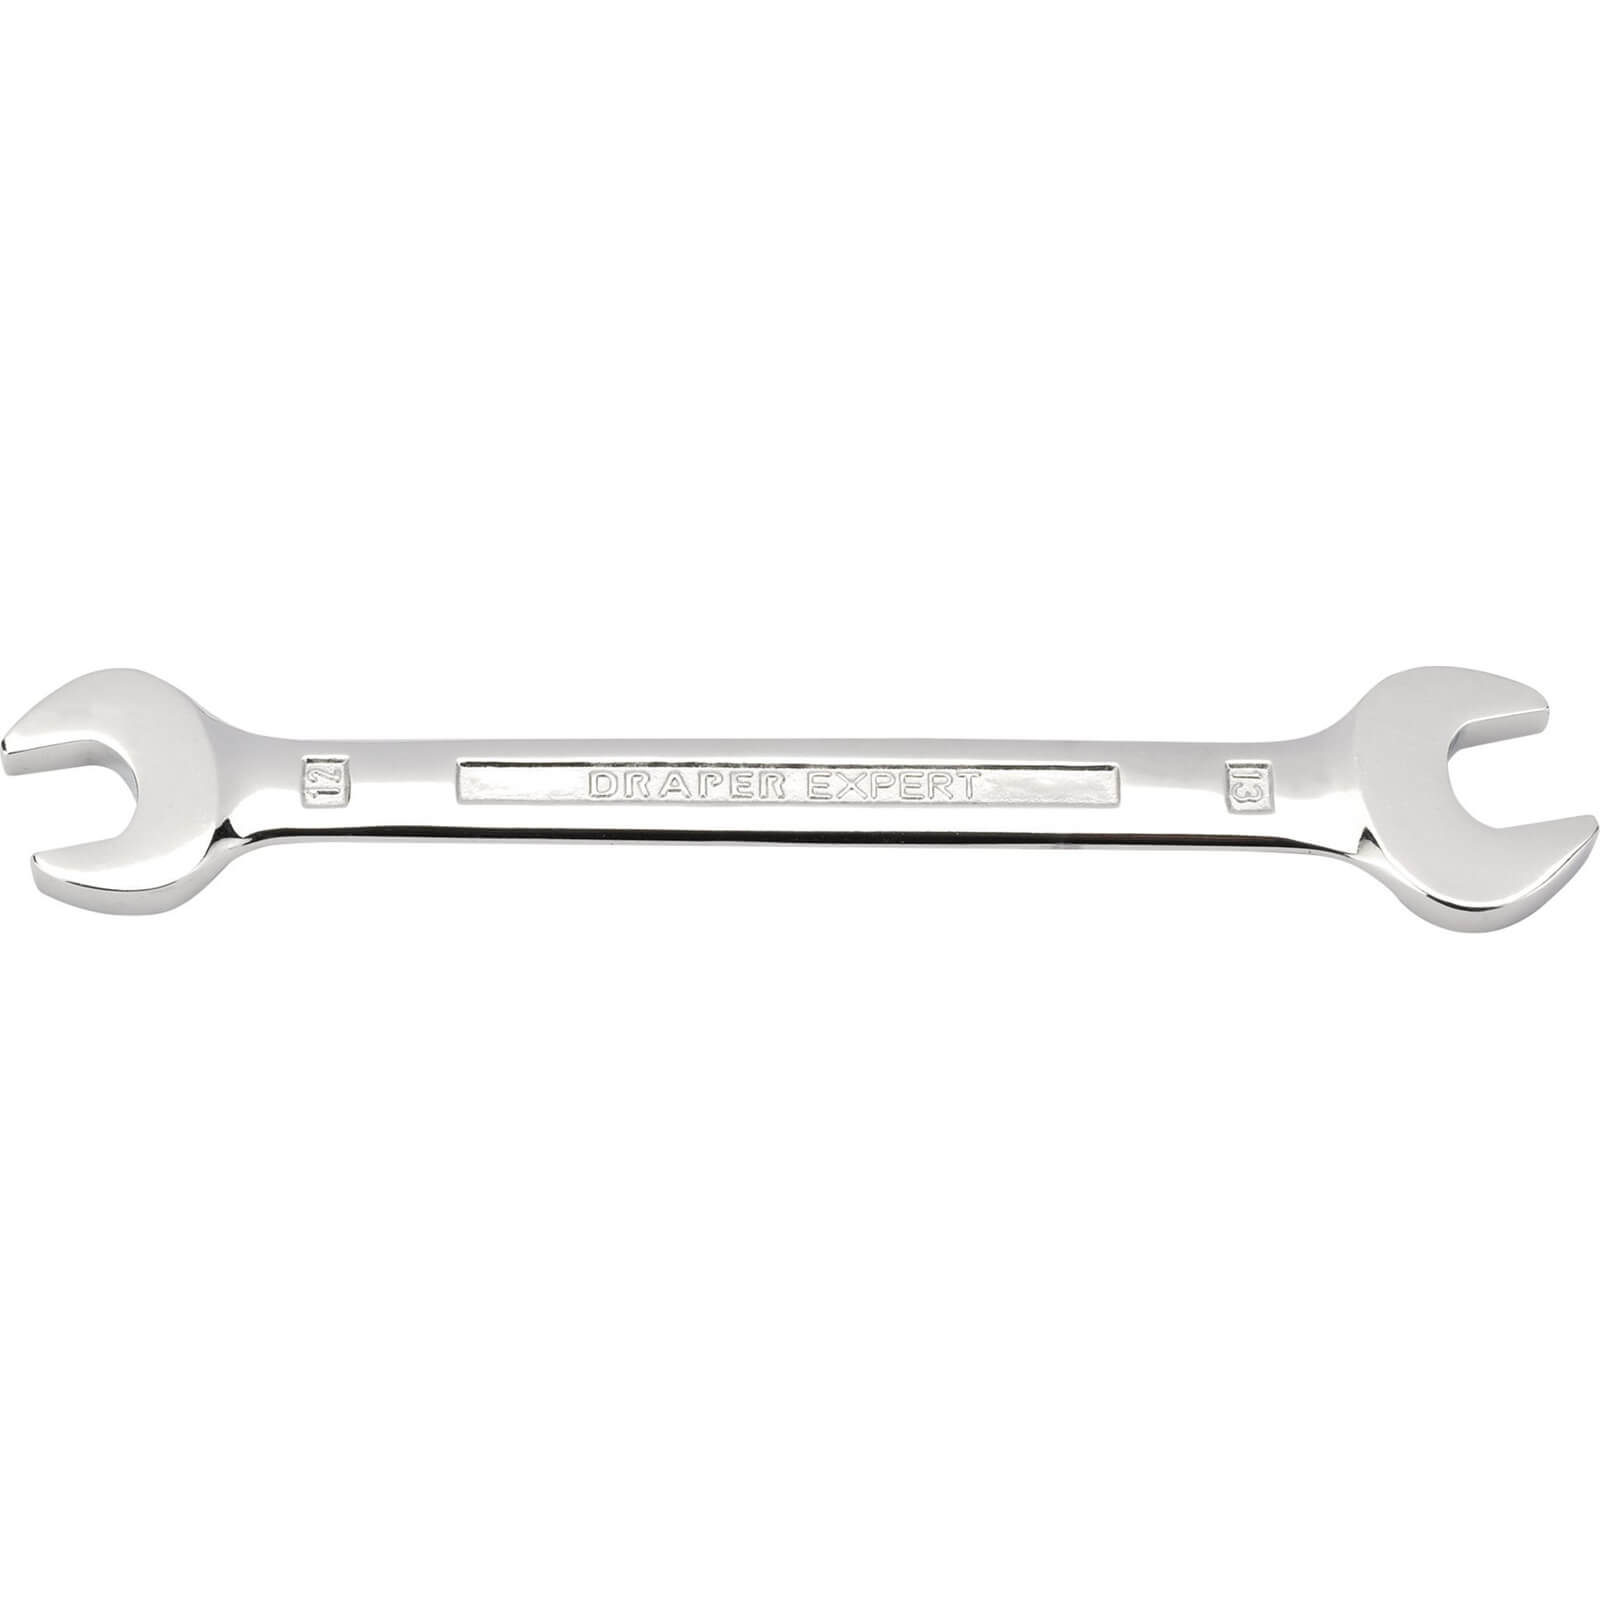 Image of Draper Expert Double Open Ended Spanner Metric 12mm x 13mm